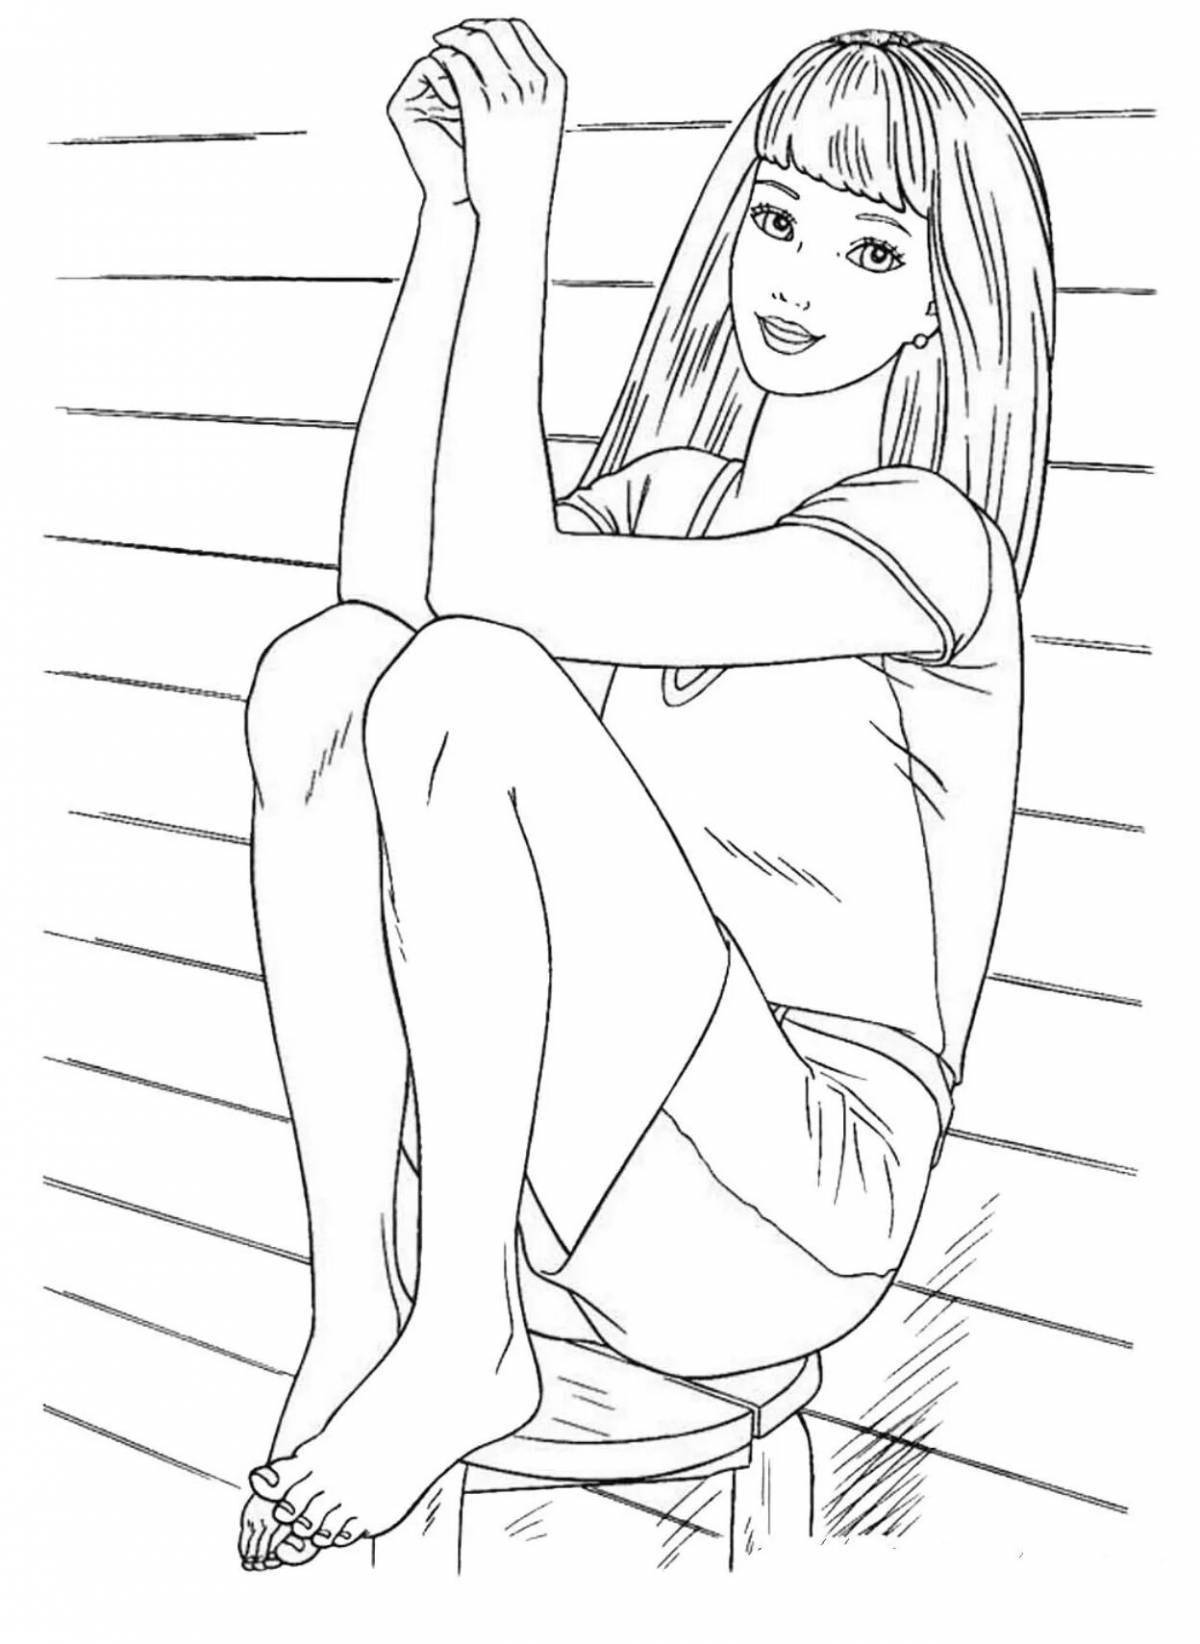 Coloring pages for girls 15-16 years old